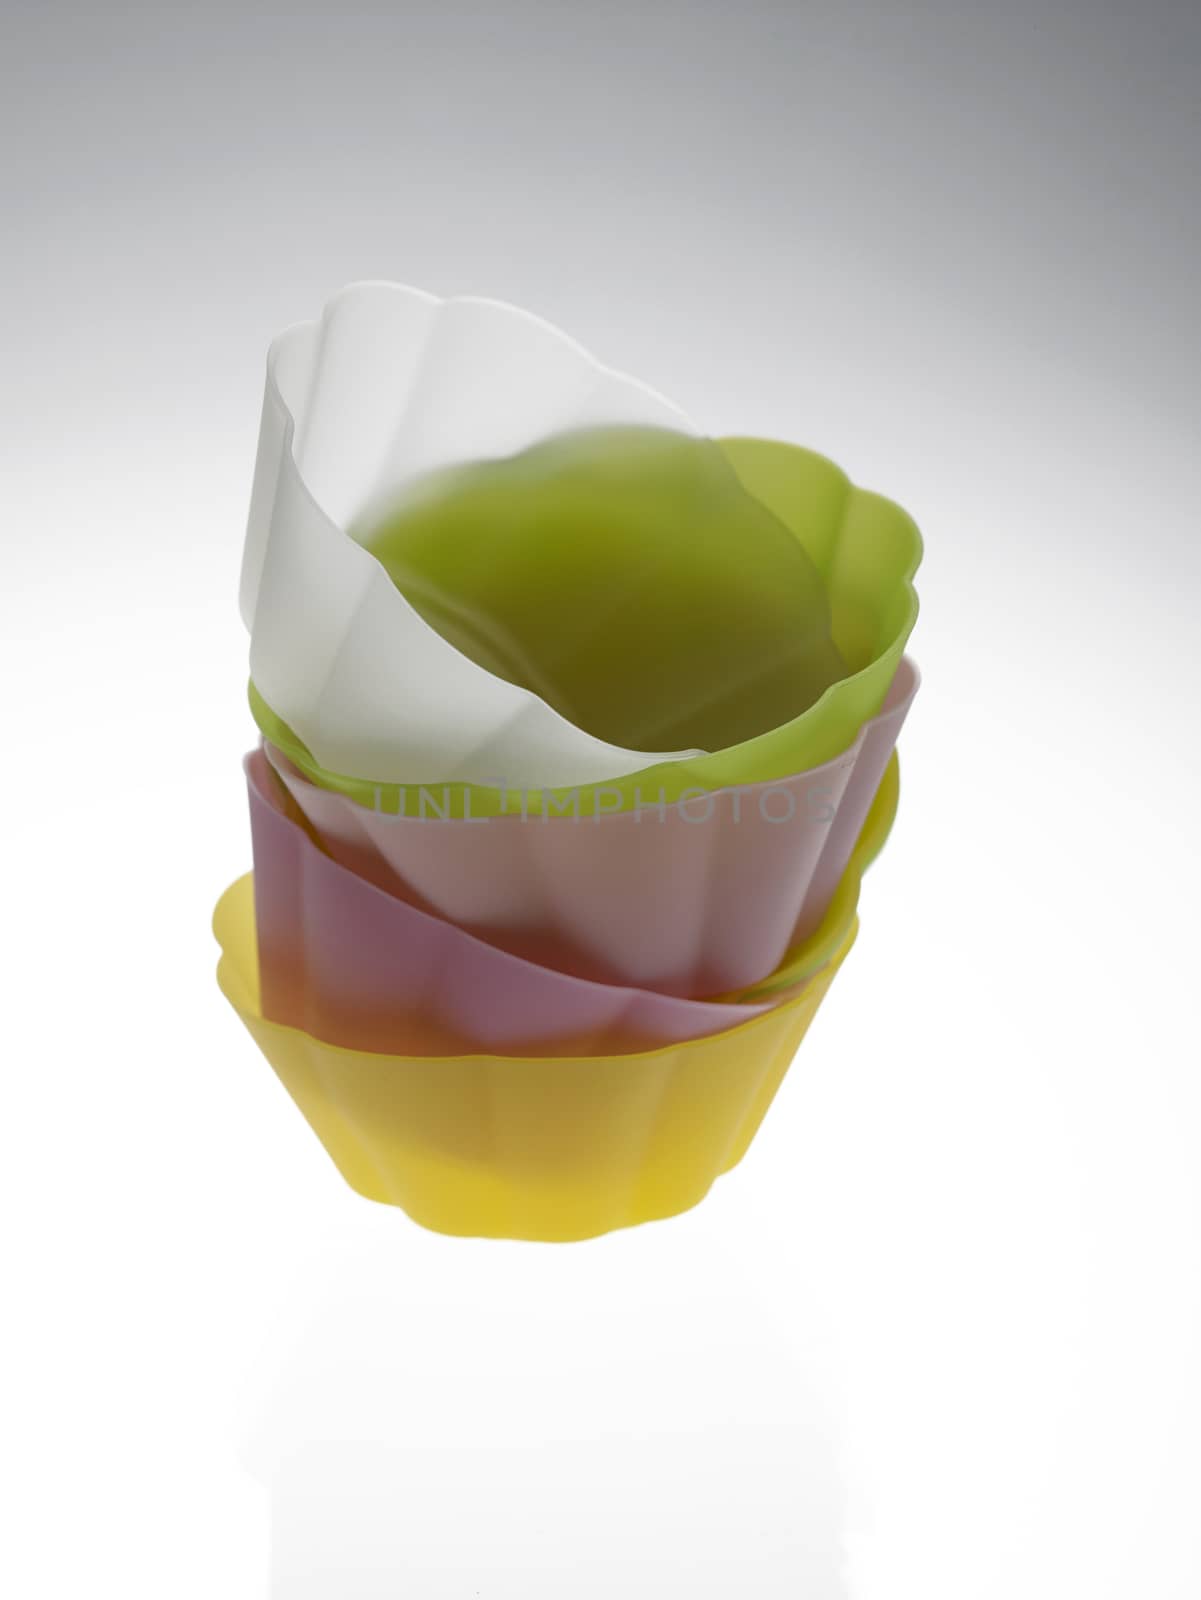 stack of the colorful cup cake wrapper